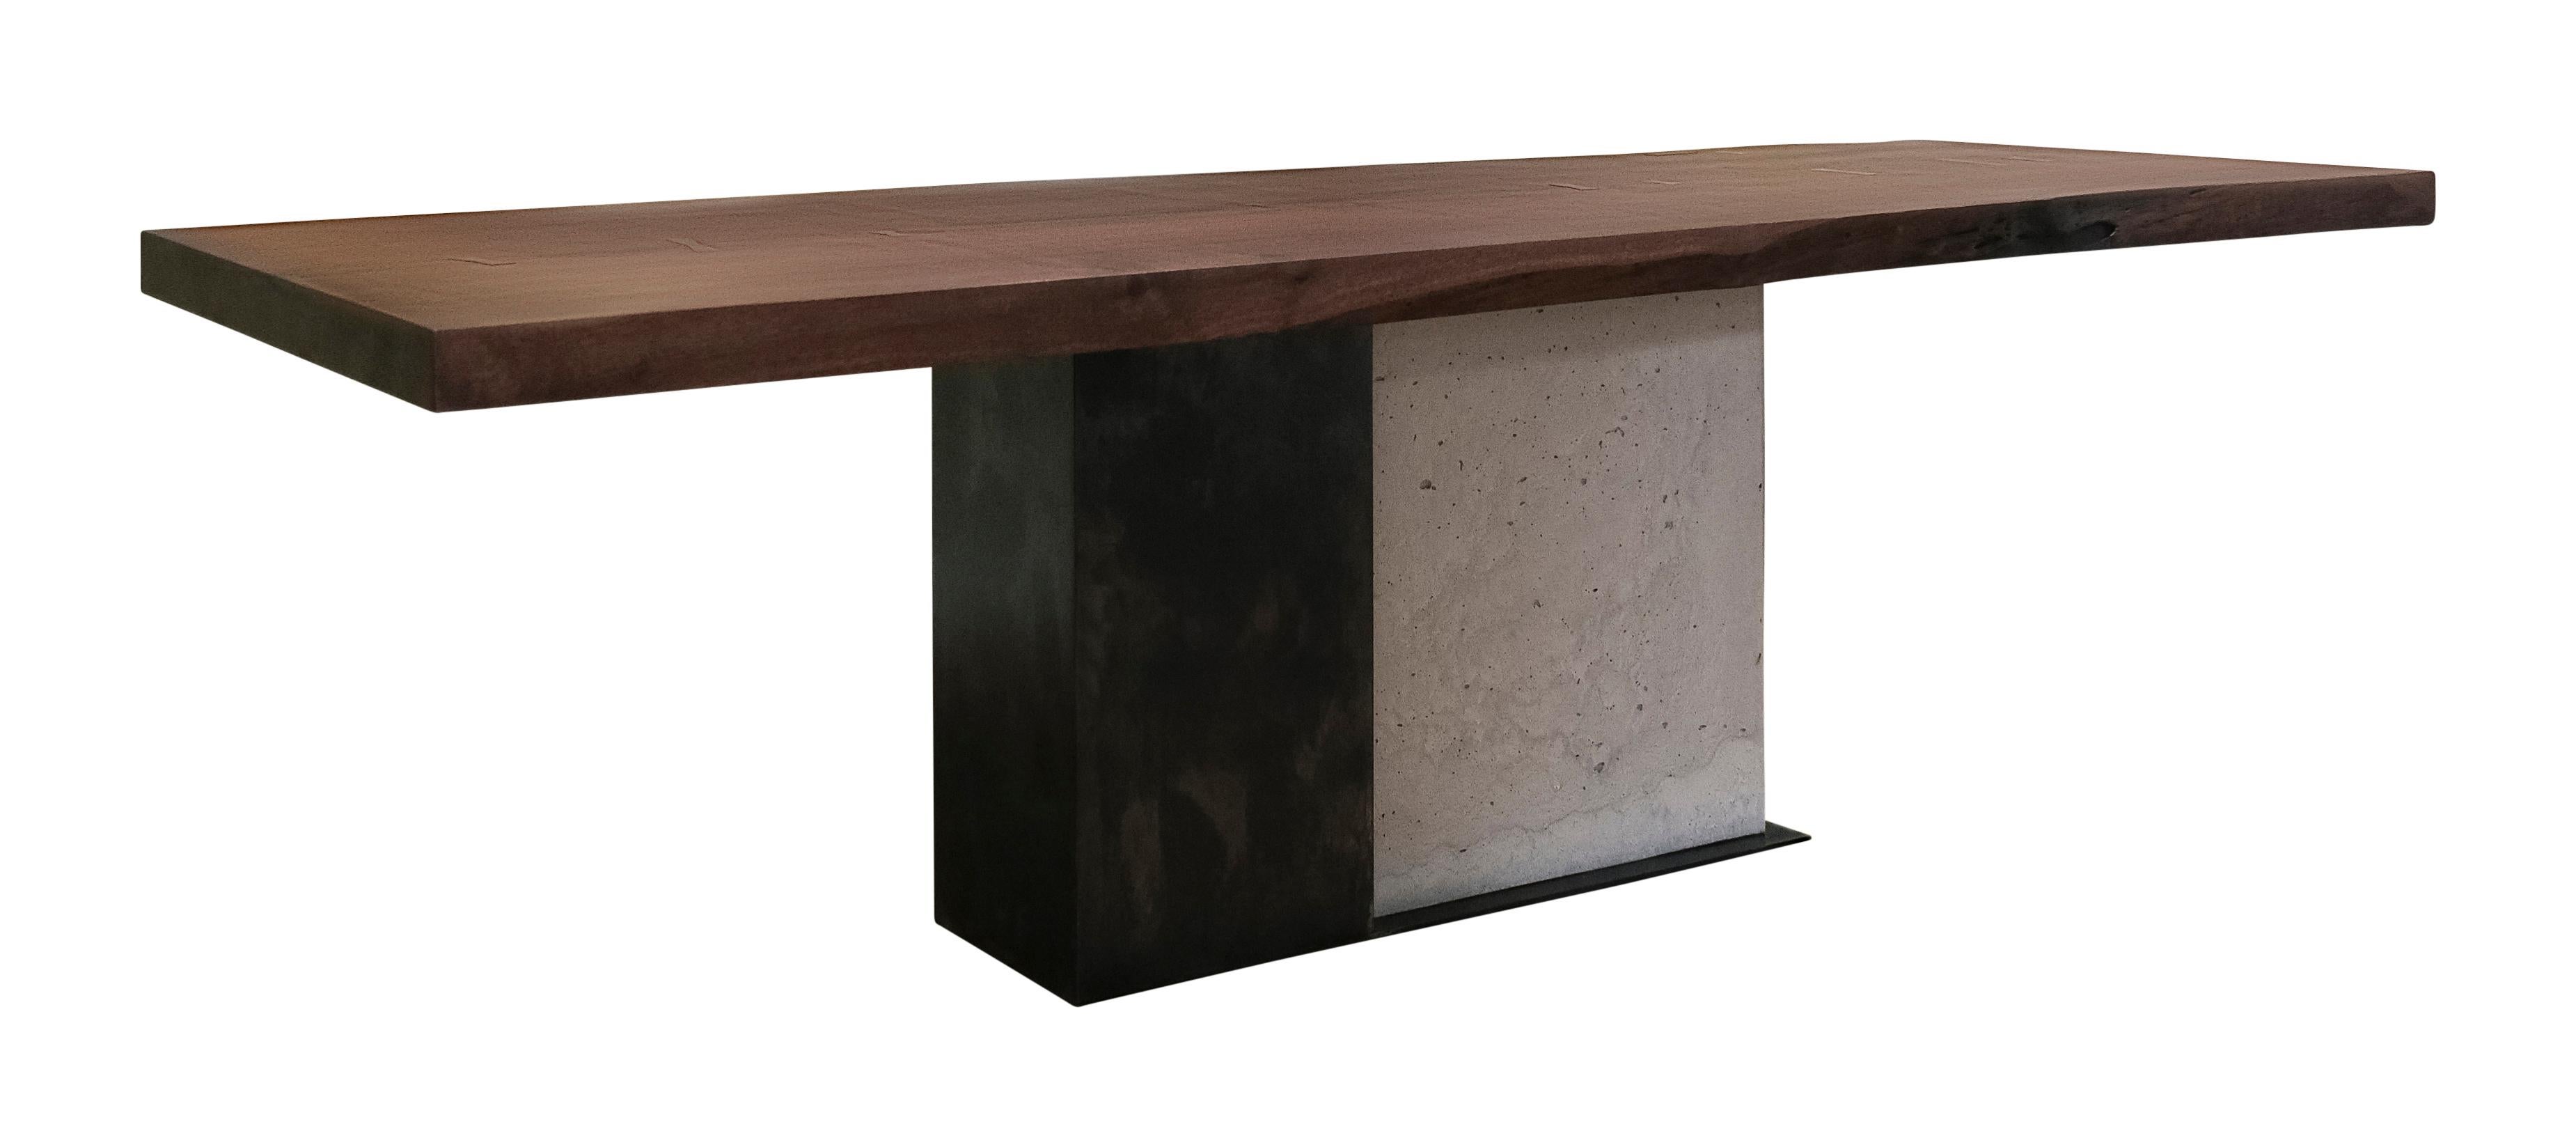 T-2 Dining Table, Live Edge Walnut Wood Top, Patinated Steel and Concrete Base In New Condition For Sale In Biddeford, ME